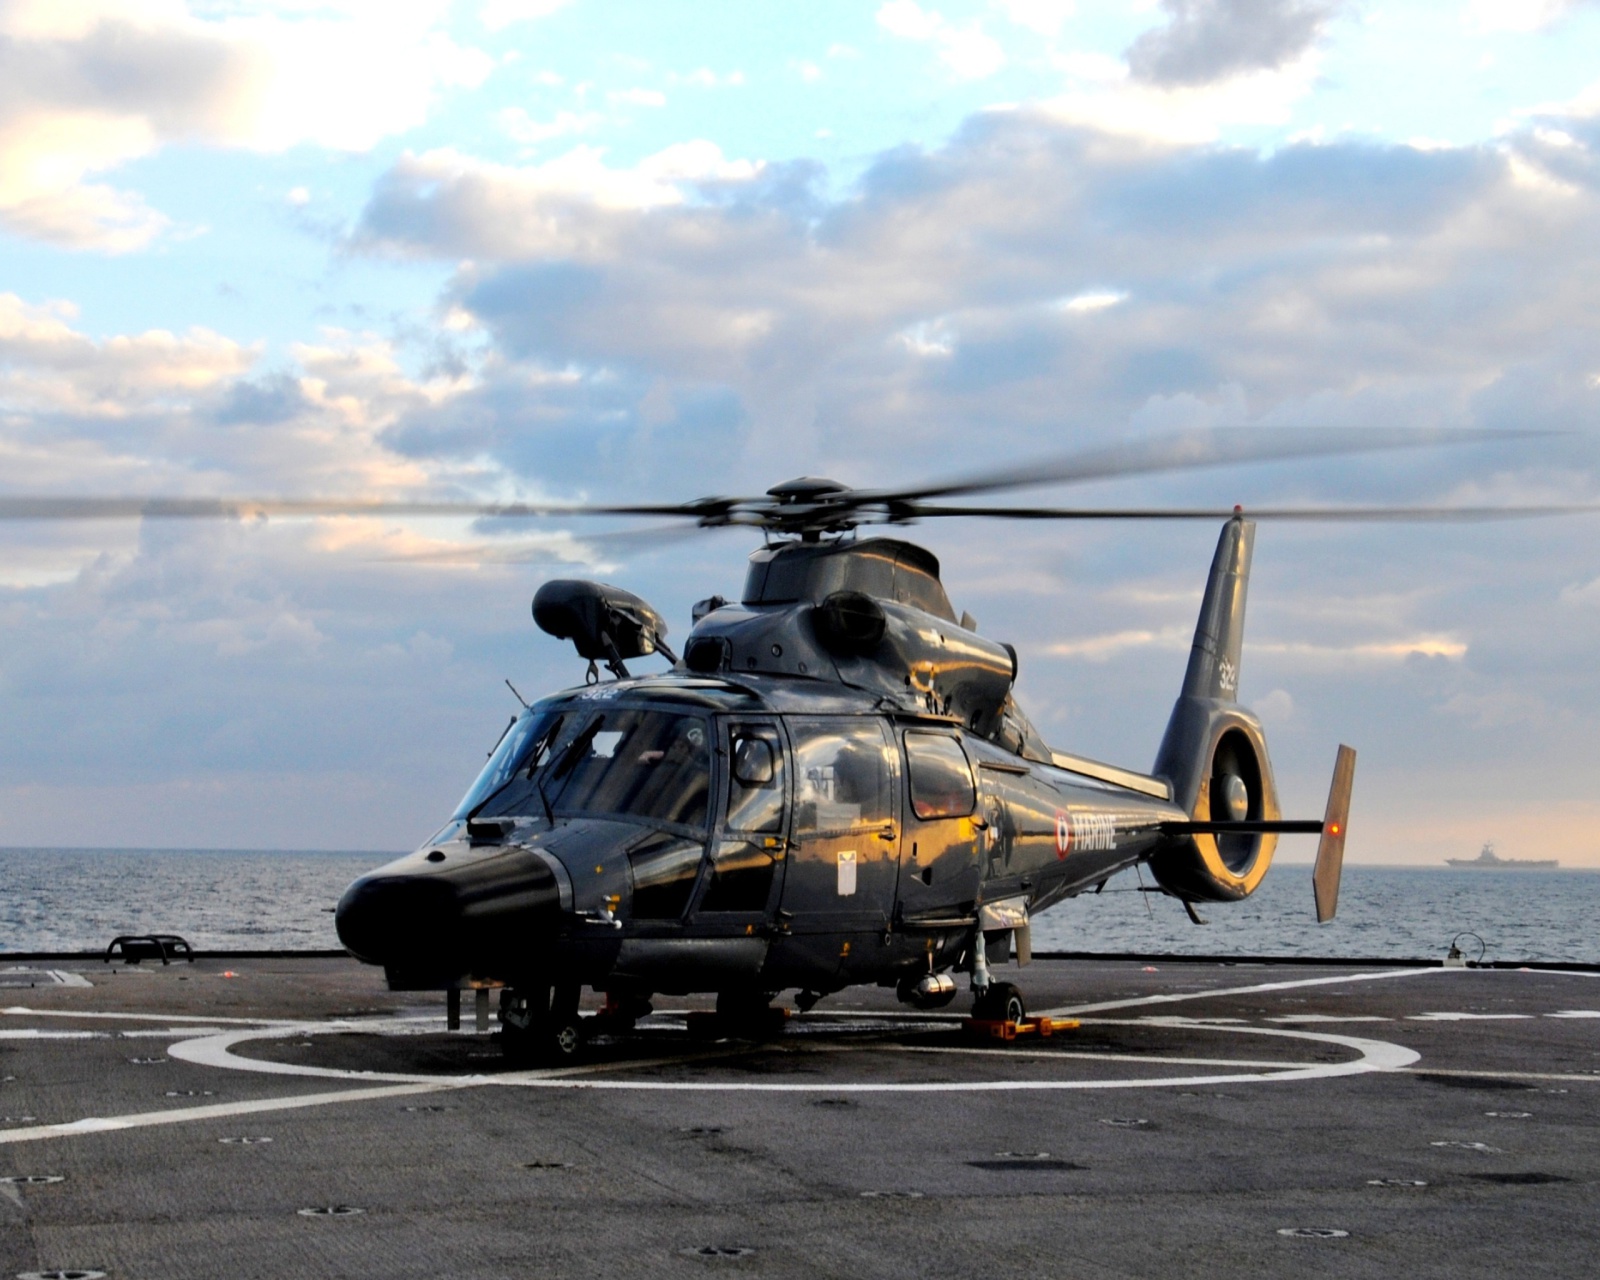 Helicopter on Aircraft Carrier screenshot #1 1600x1280